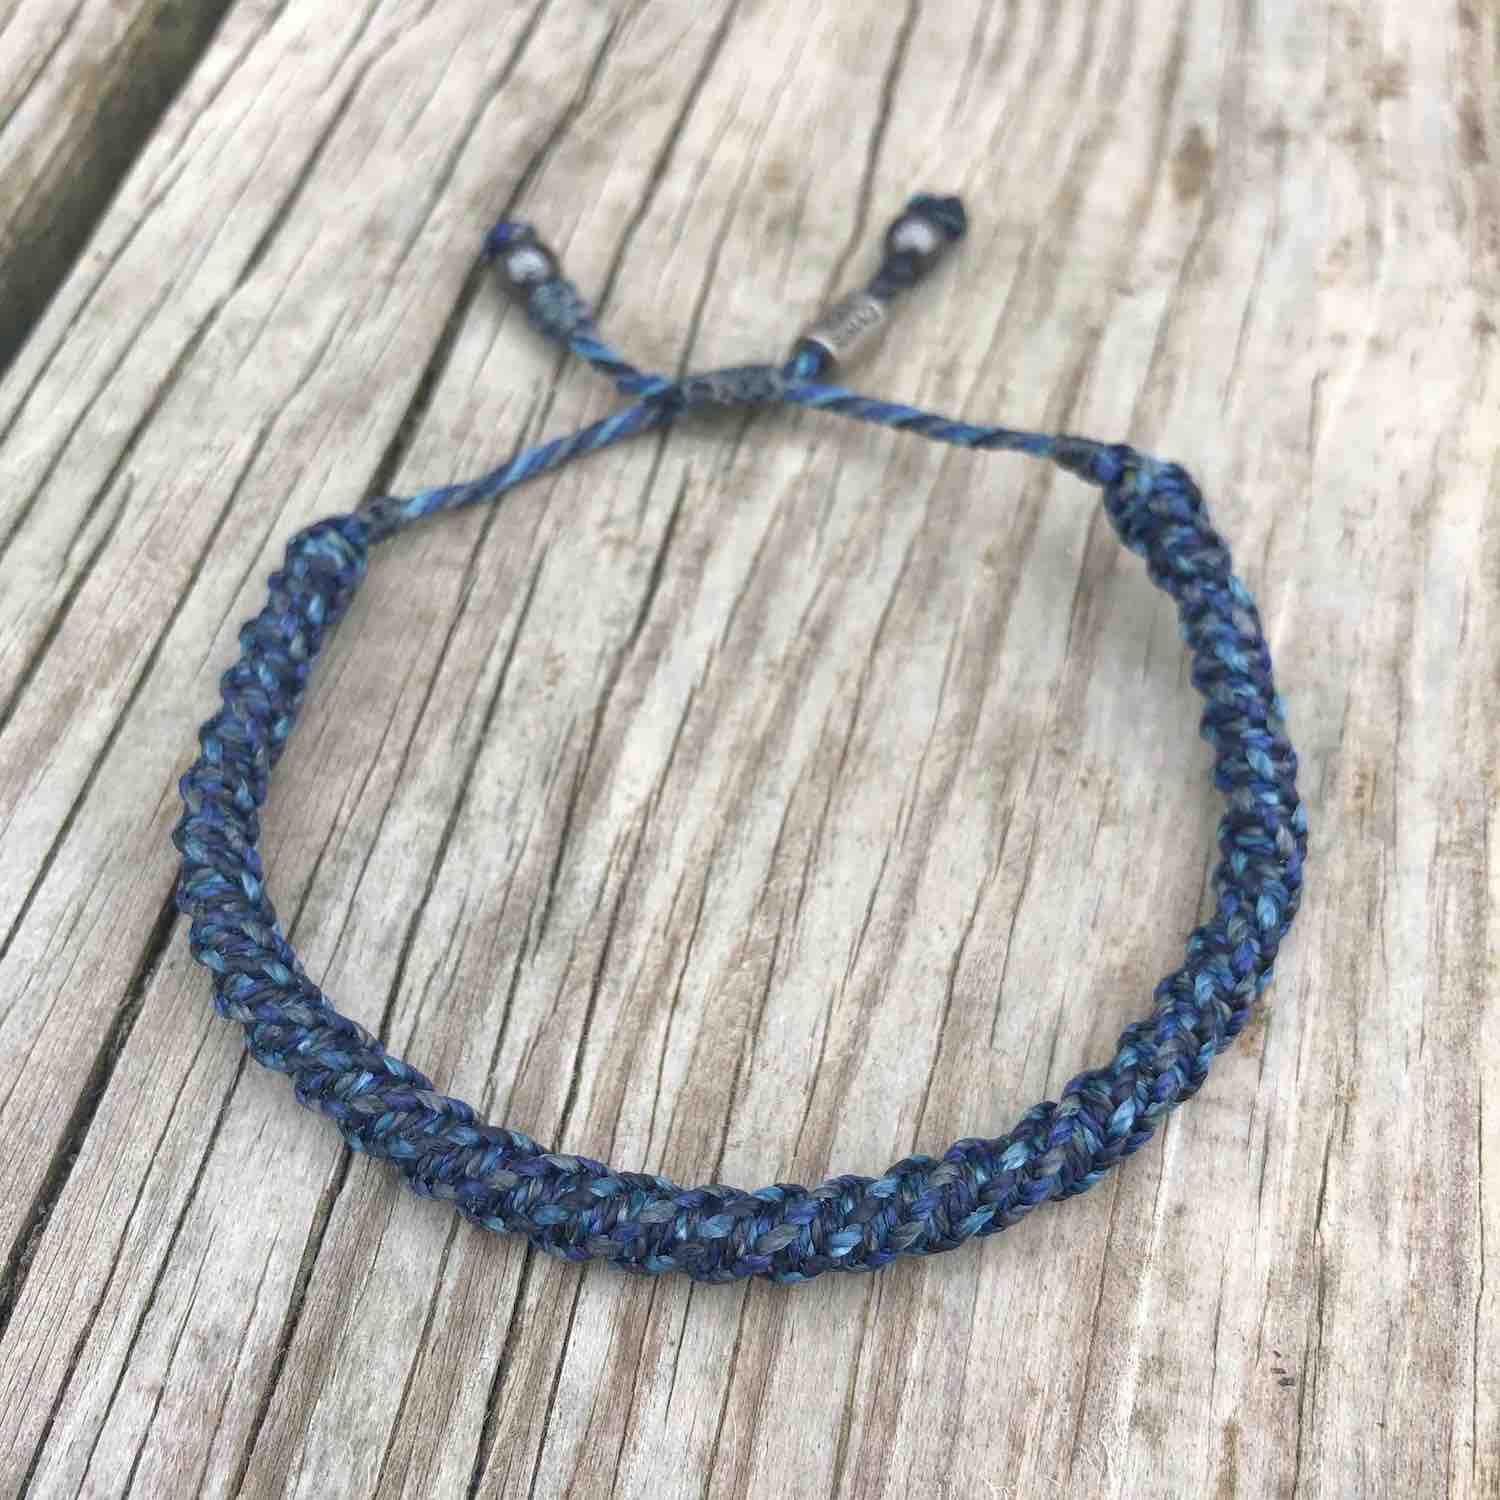 Adjustable Nautical Braid Climbing Rope Bracelet For Men And Women Simple  Knot Umbrella Ropes Original Blue Nile Jewelry From Universitystore, $9.41  | DHgate.Com